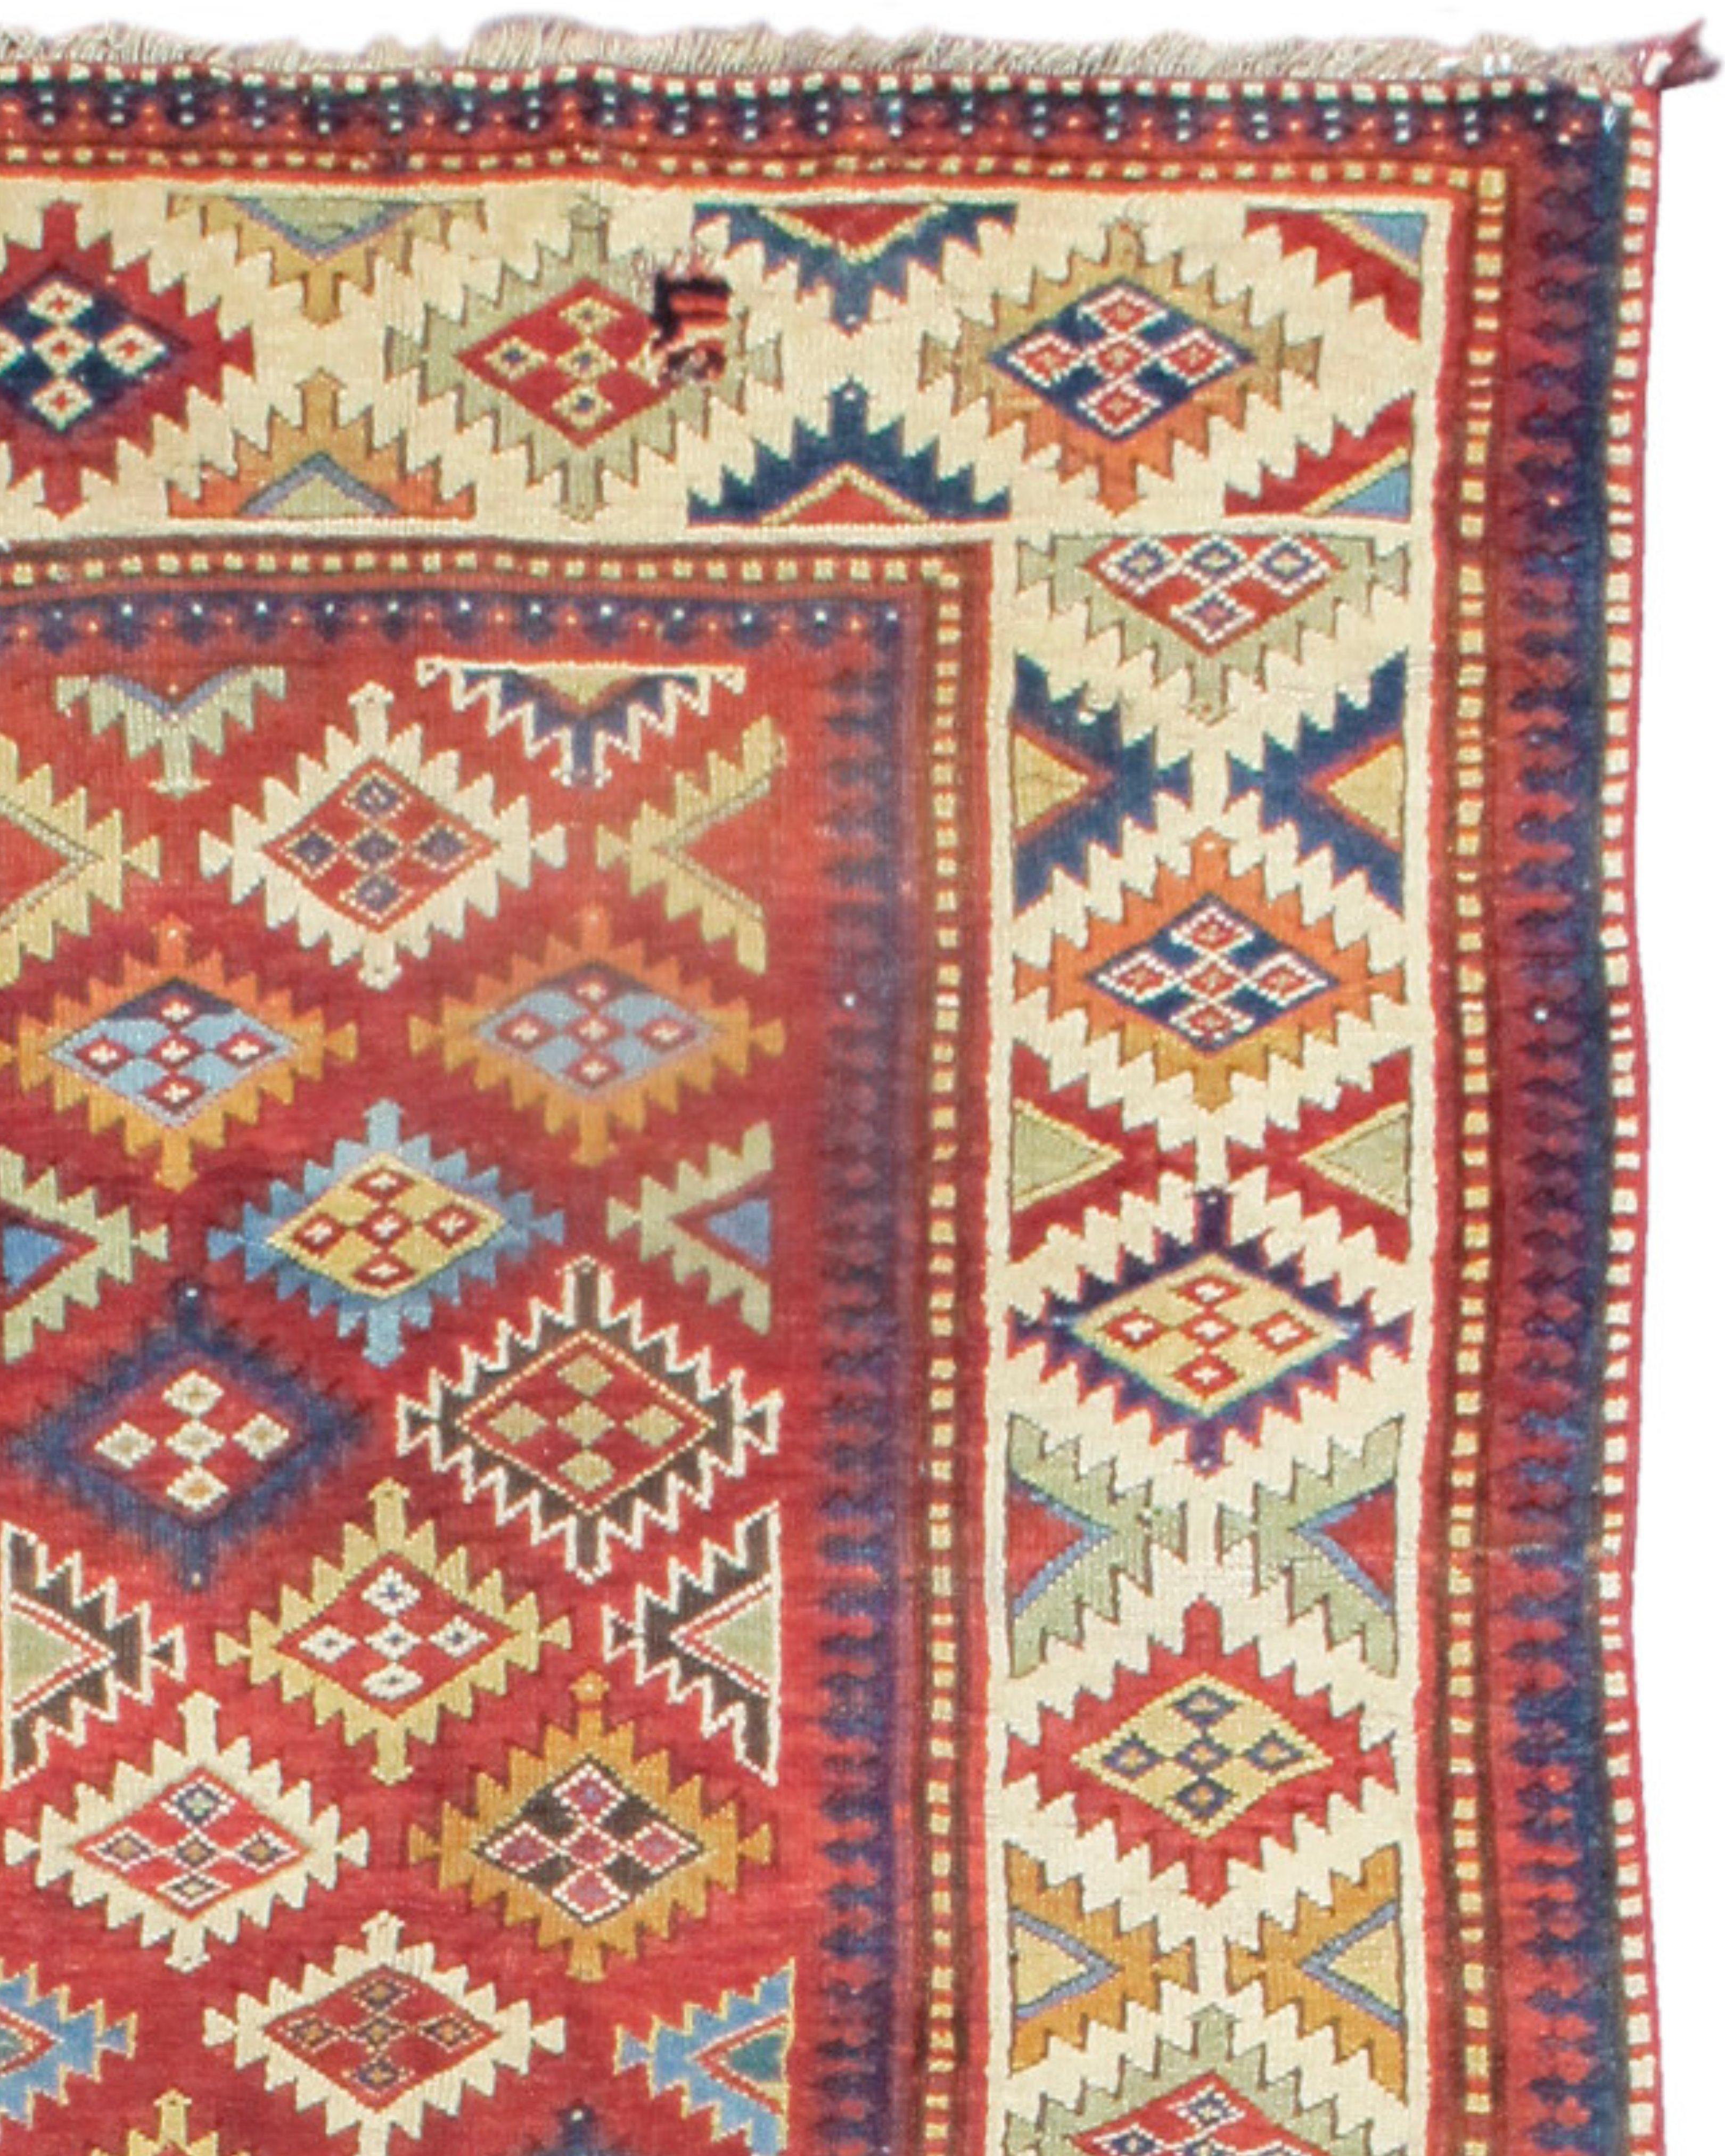 Antique South Caucasian Long Rug, Late 19th Century

Additional Information:
Dimensions: 4'2